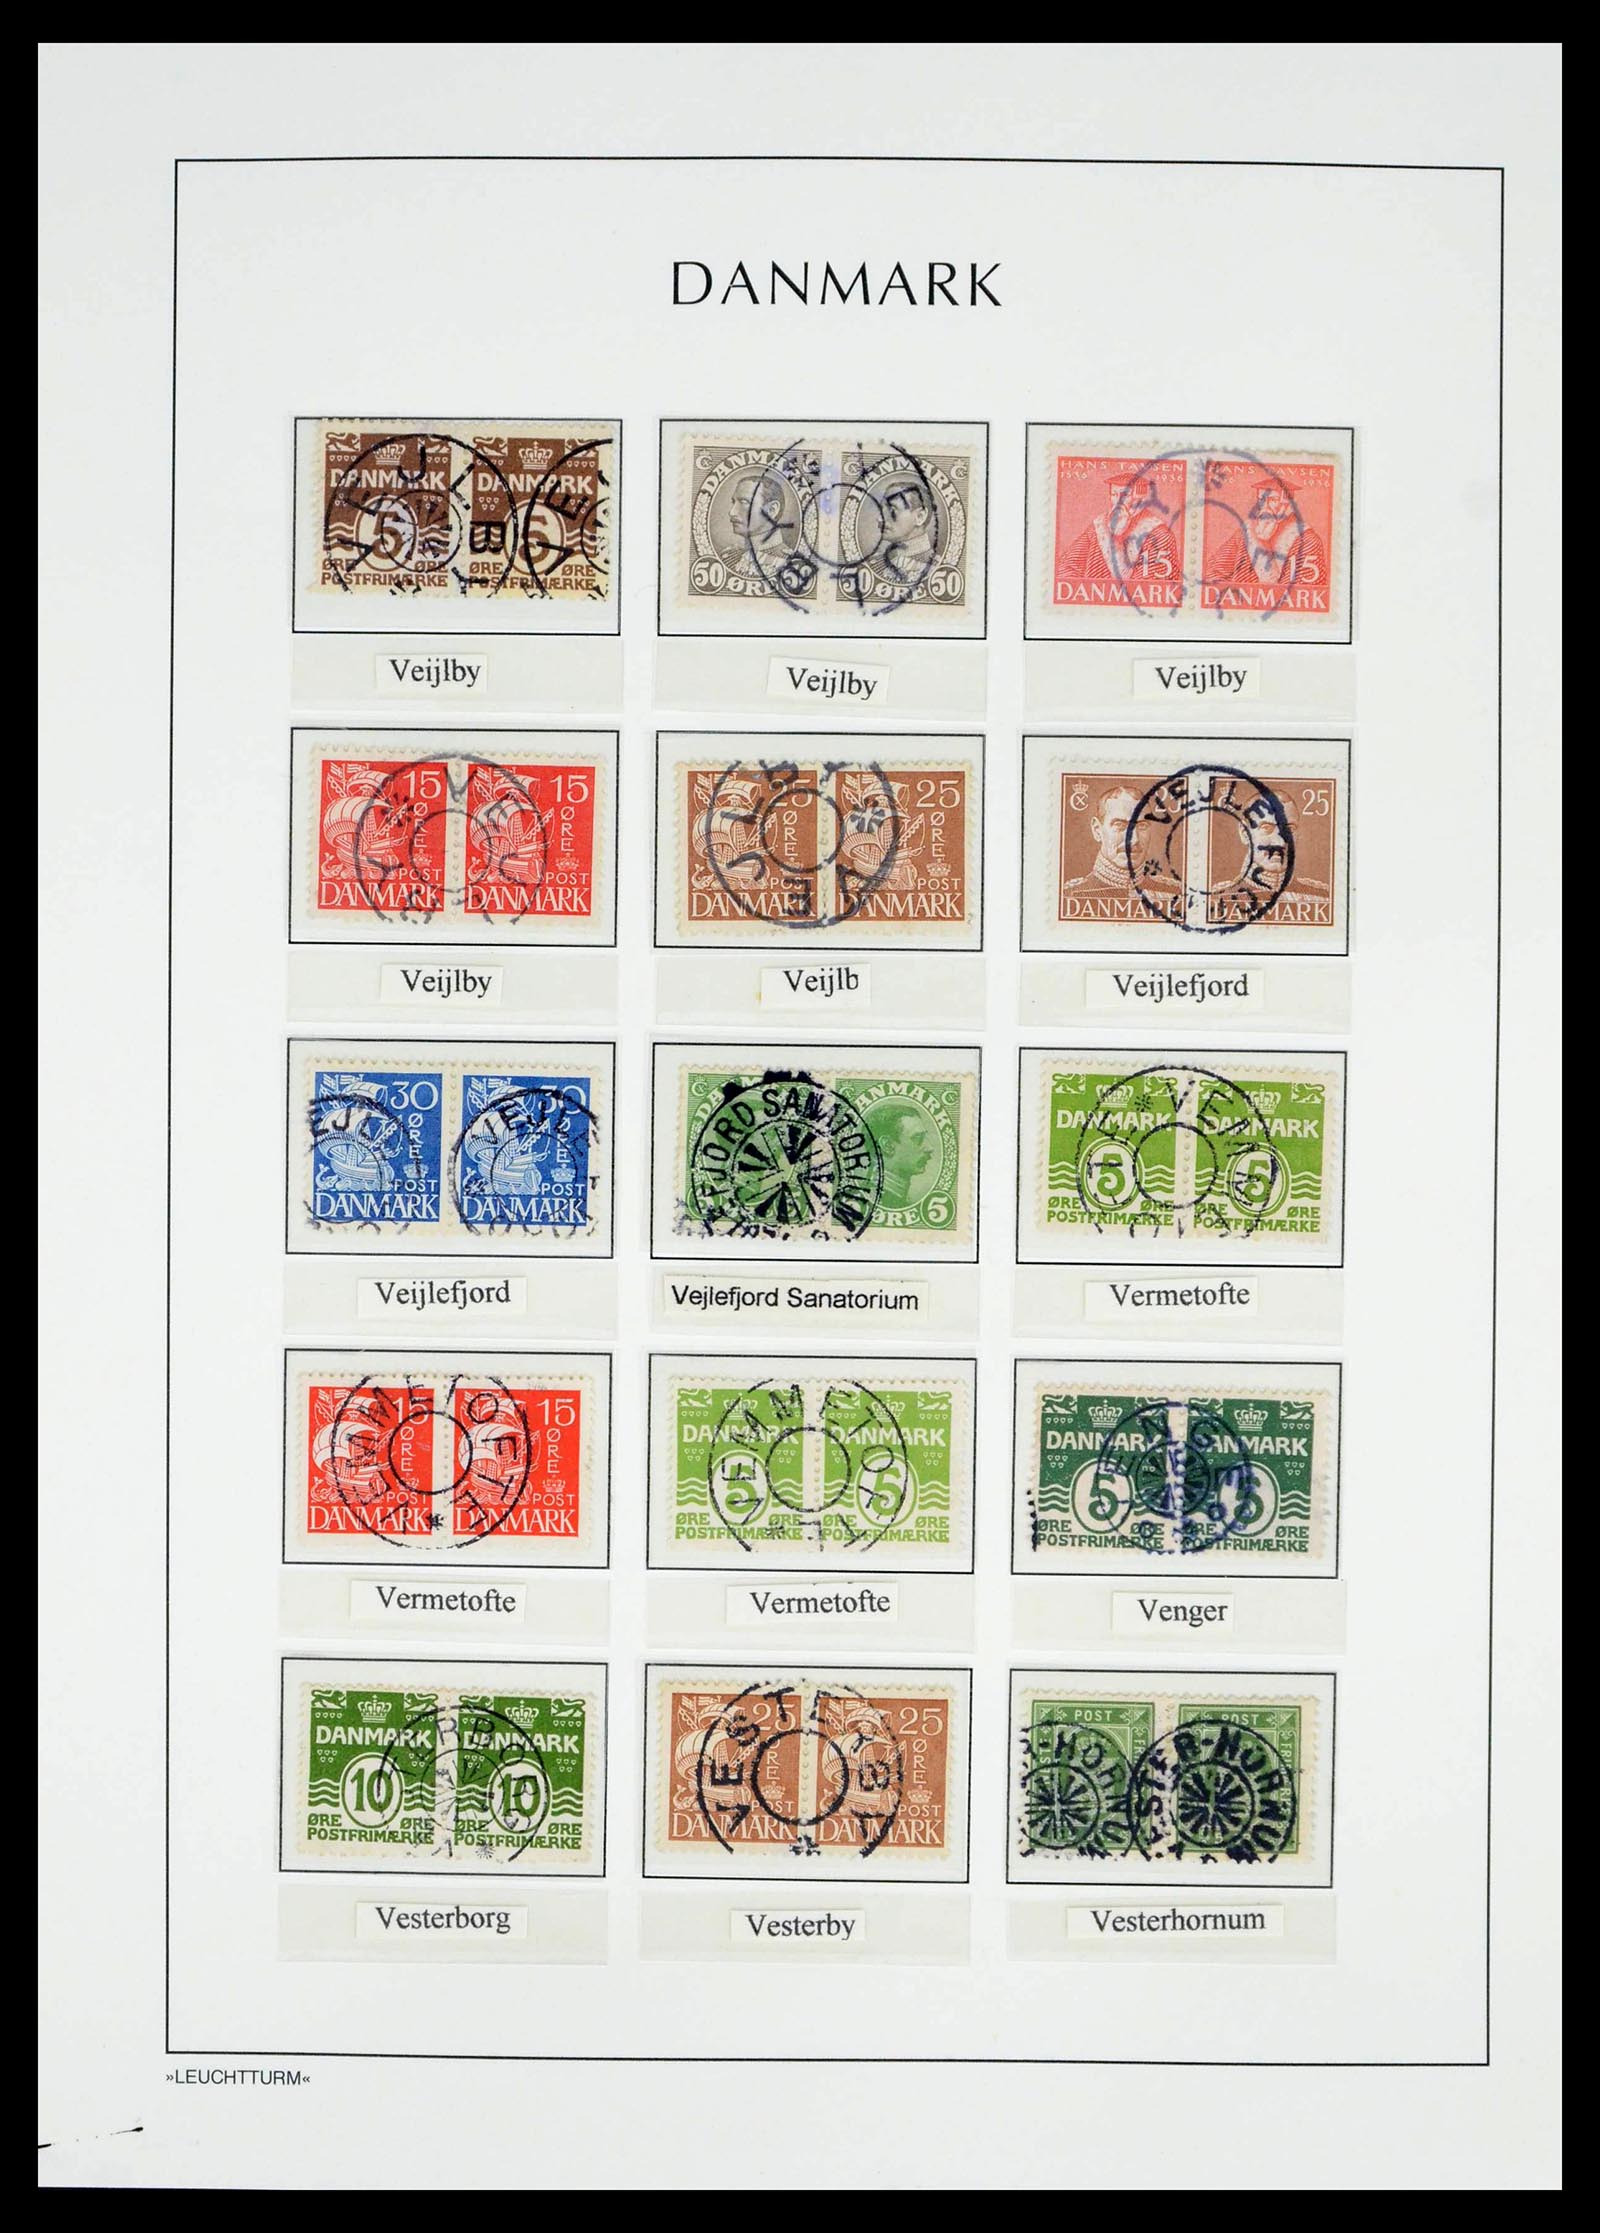 39450 0194 - Stamp collection 39450 Denmark star cancels 1874-1940.